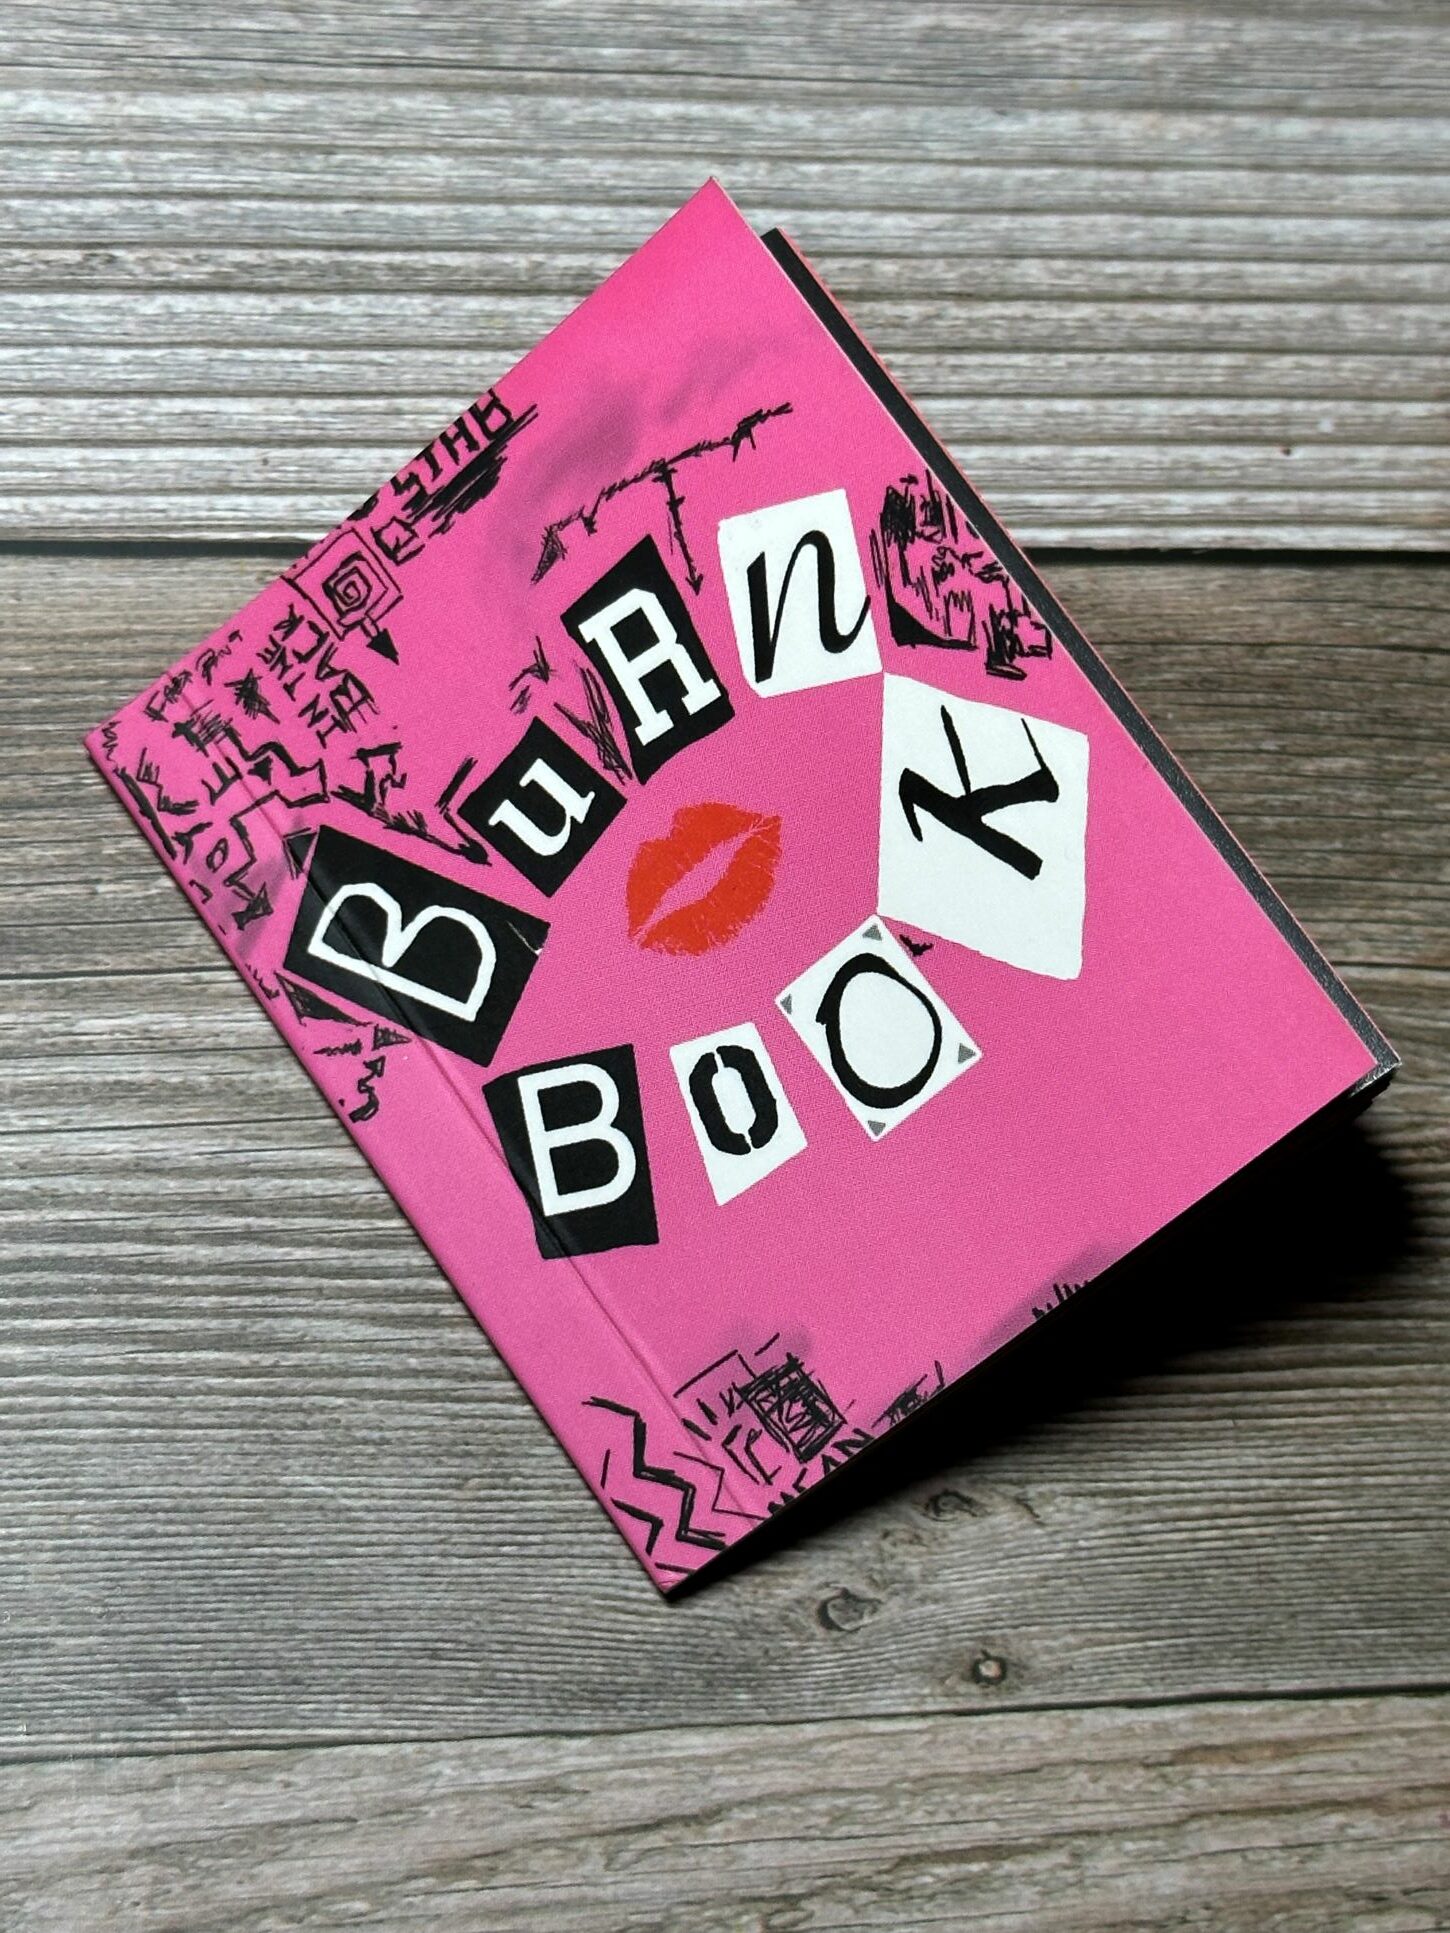 An image of a miniature Burn Book from the Mean Girls Experience.